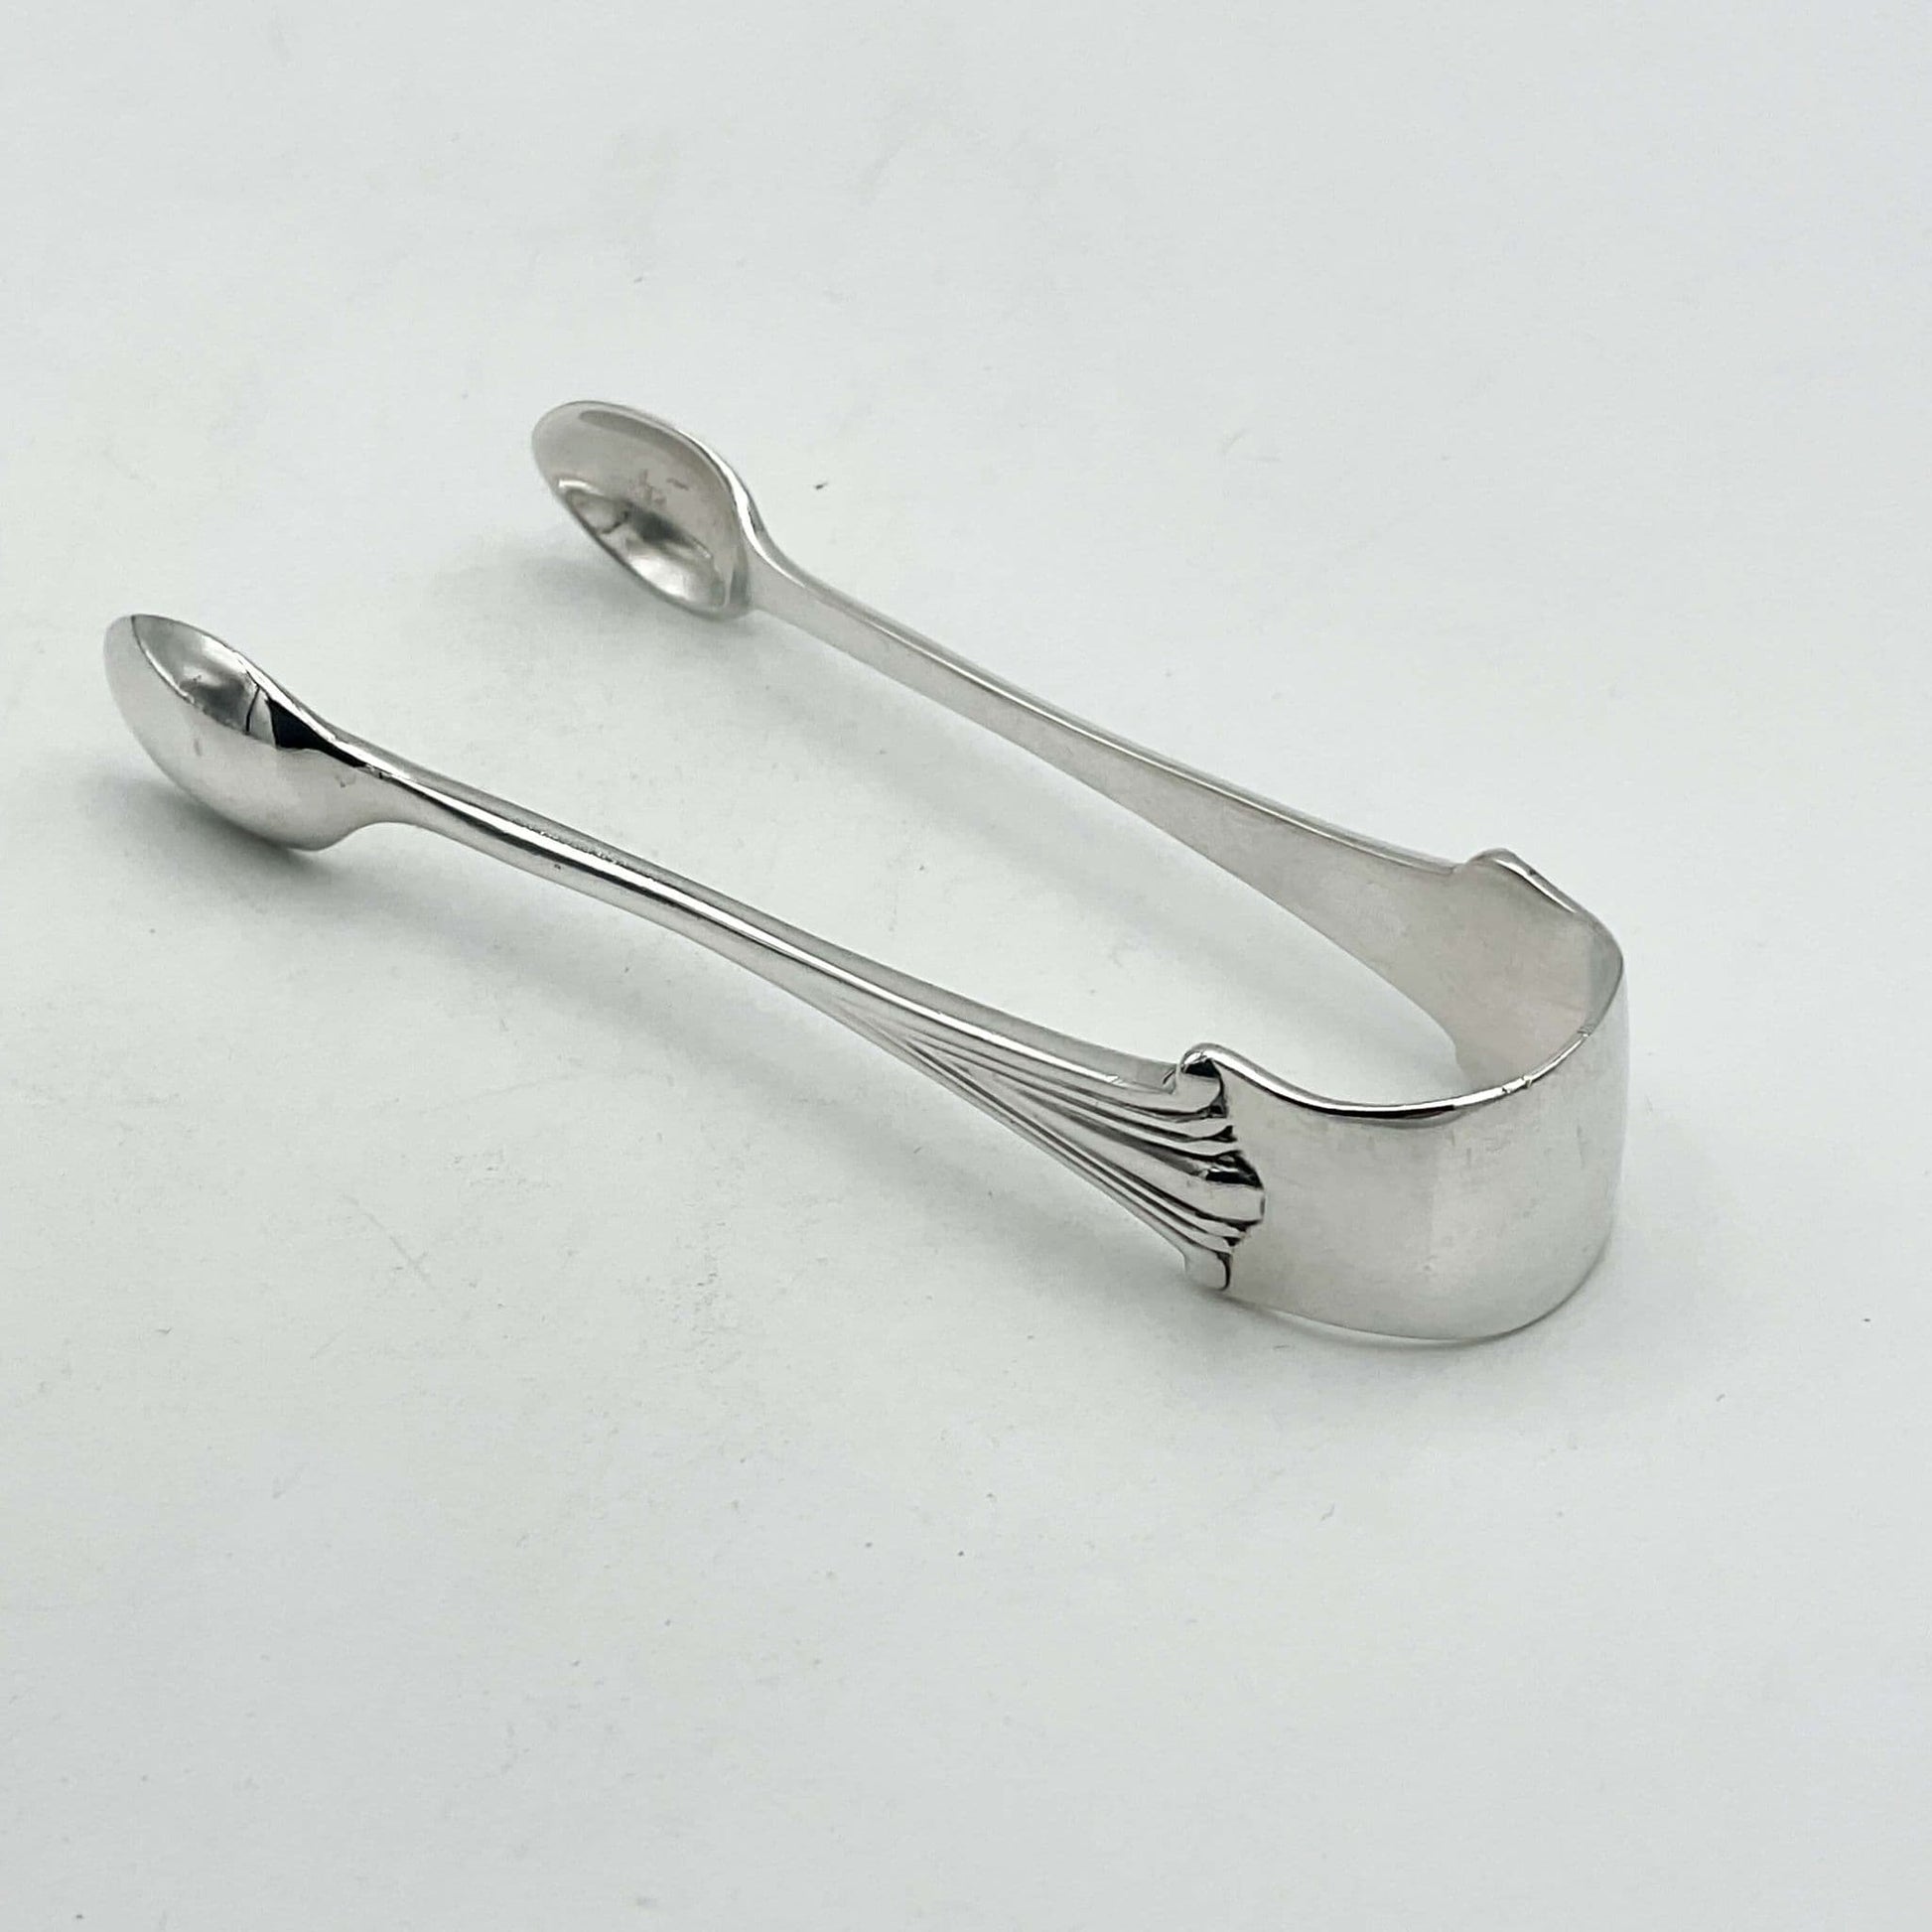 Silver sugar tongs showing an art deco design on a white background